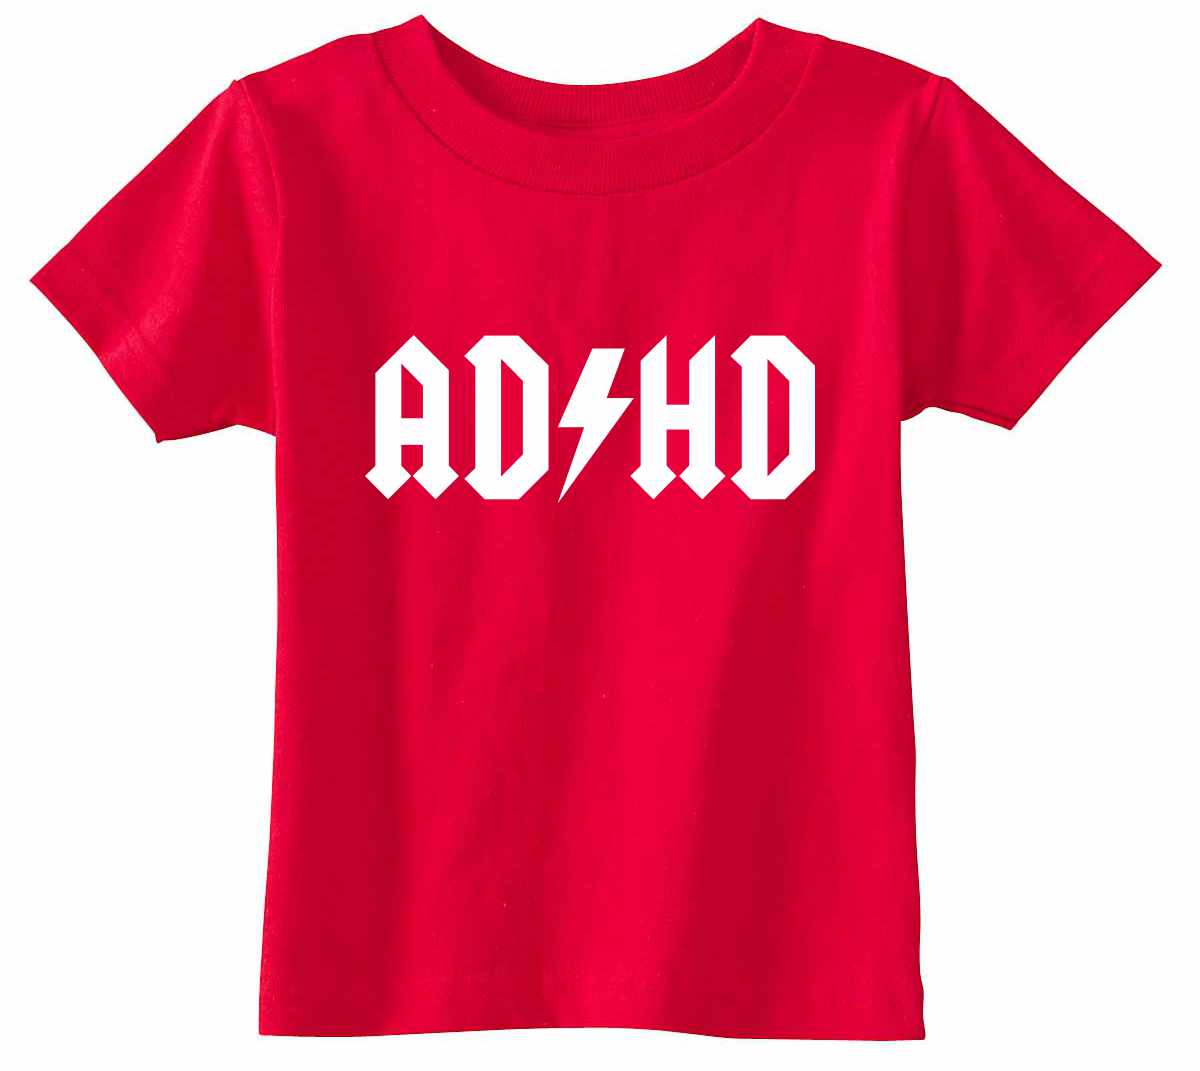 ADHD Infant/Toddler  (#828-7)